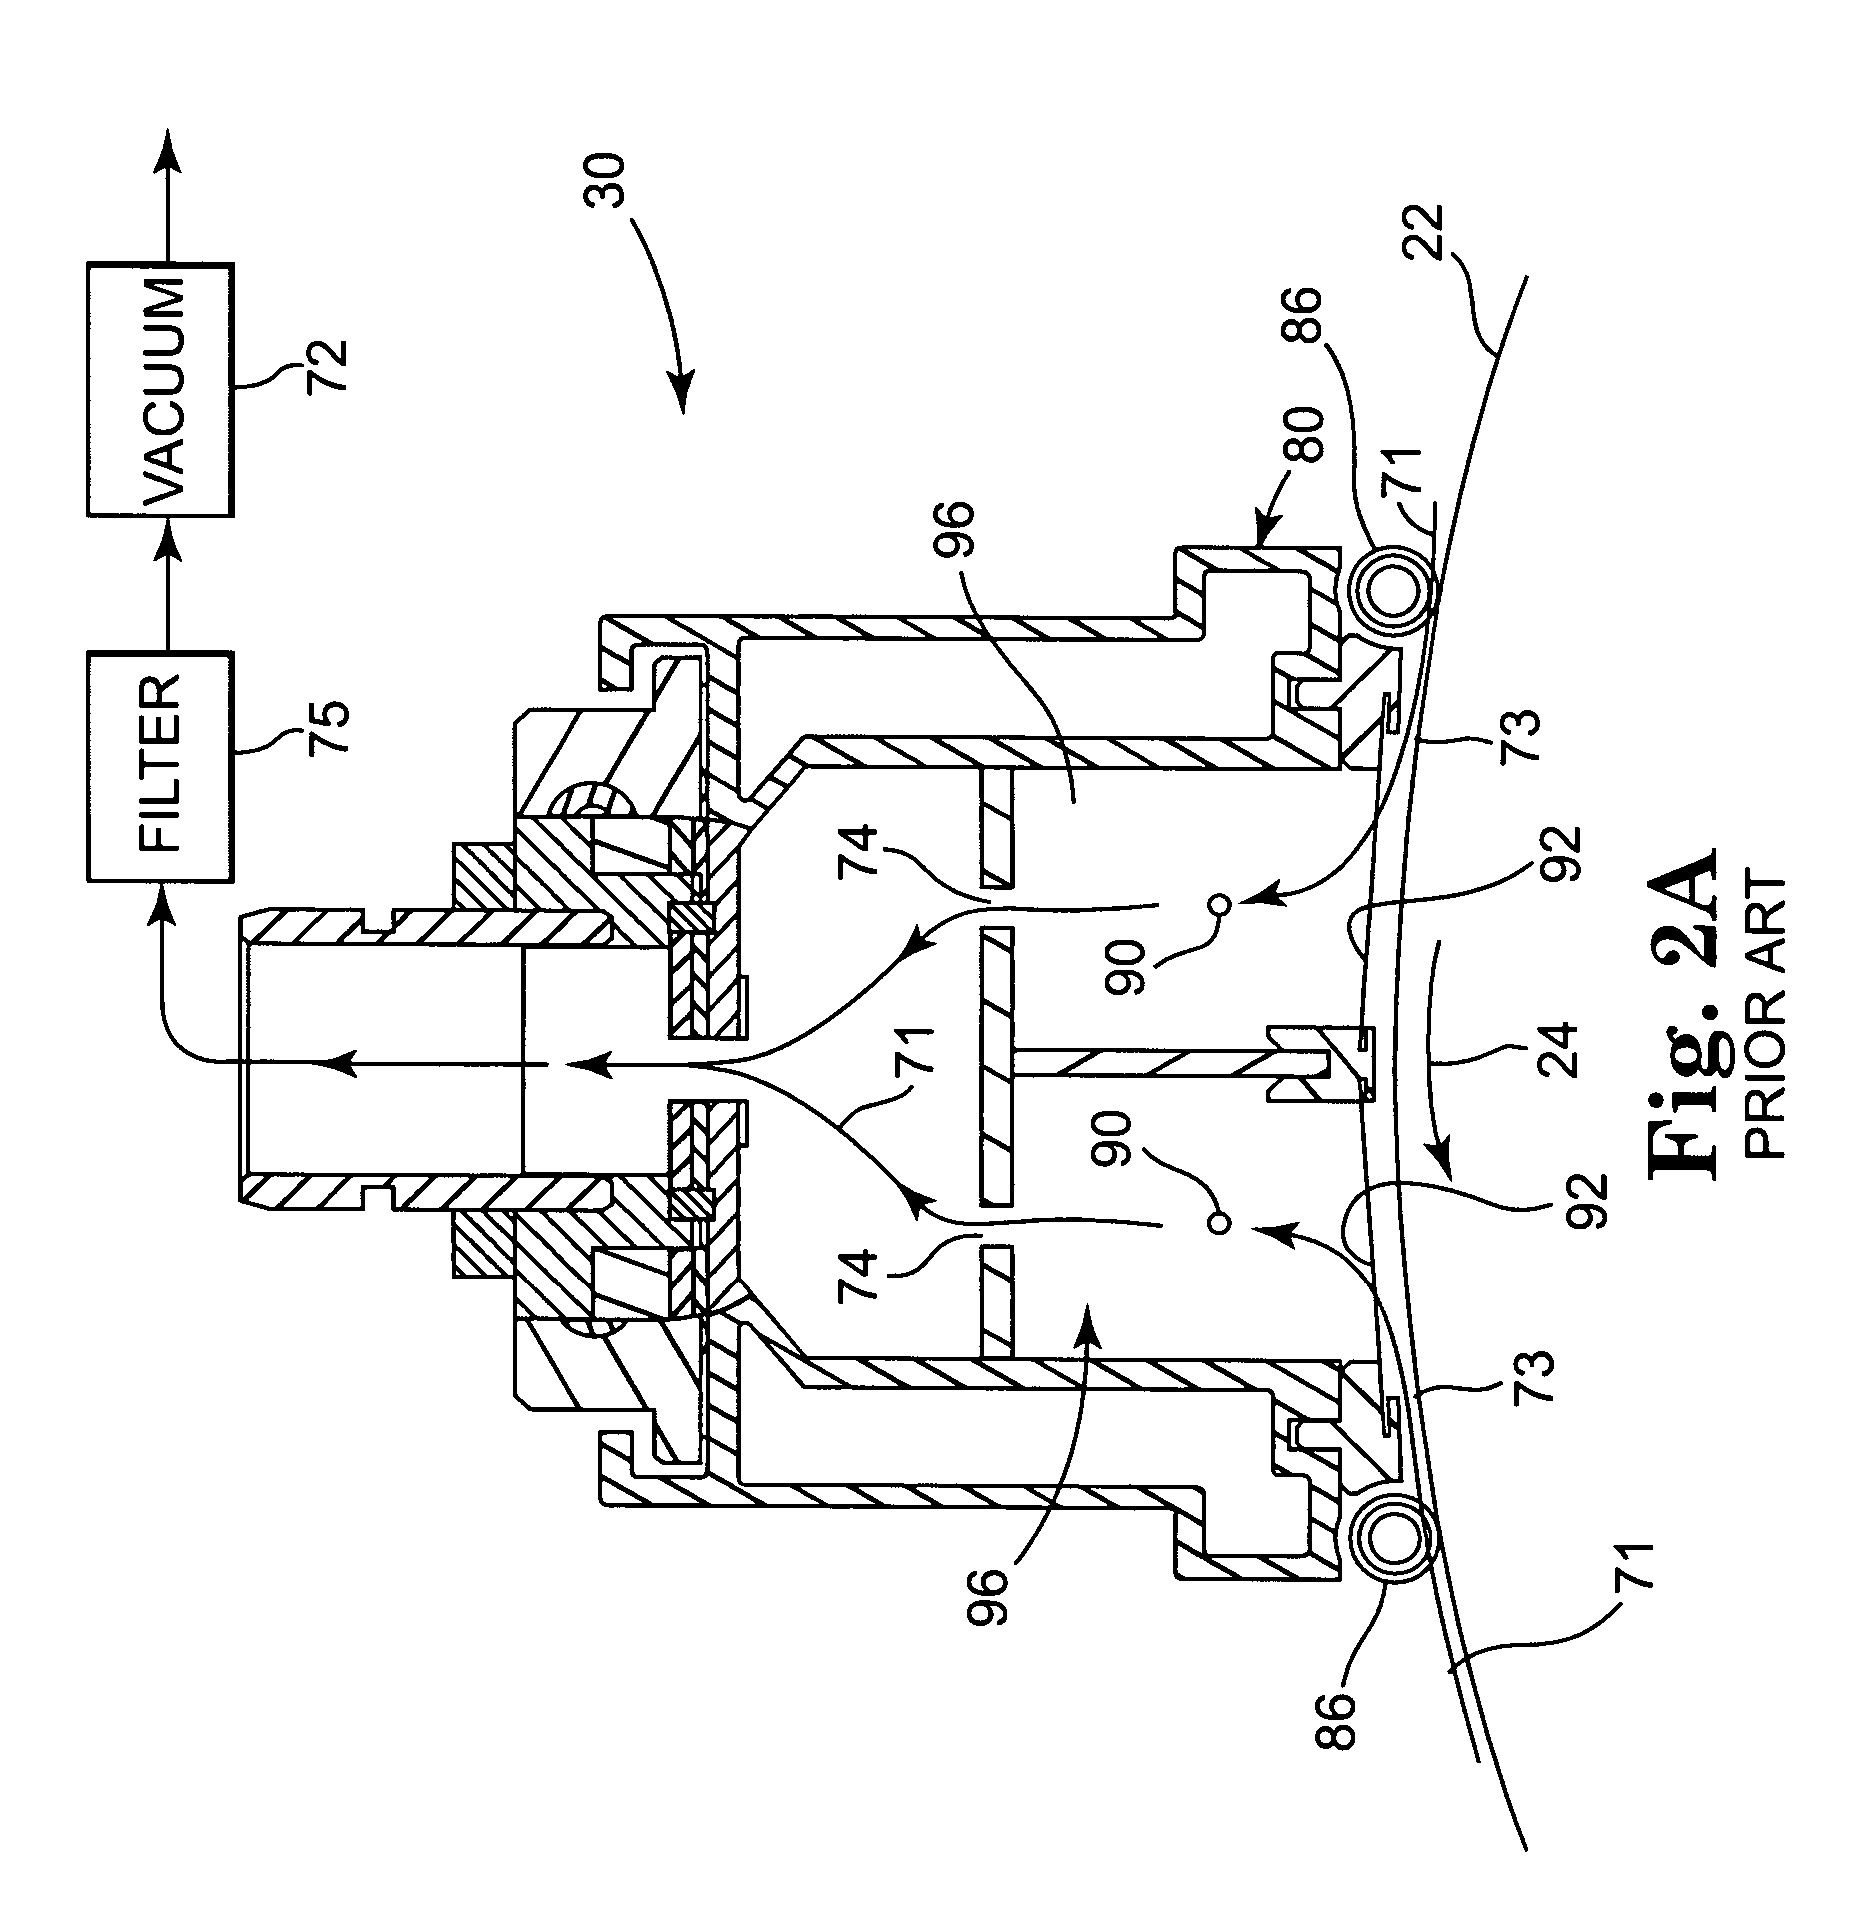 Apparatus and method for reducing contamination of an image transfer device